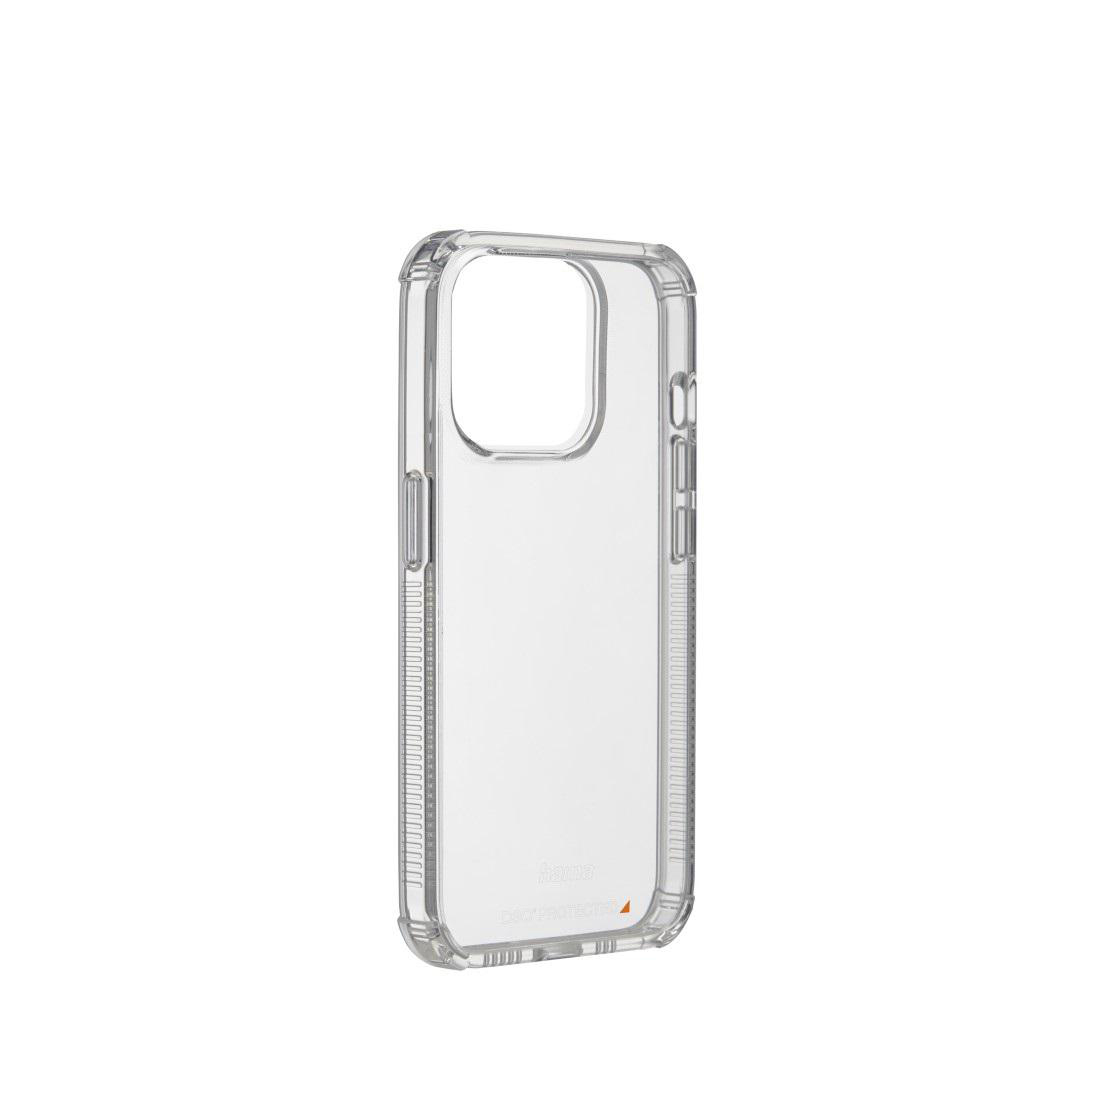 HAMA Extreme Protect, 15 Apple, Max, iPhone Transparent Pro Backcover